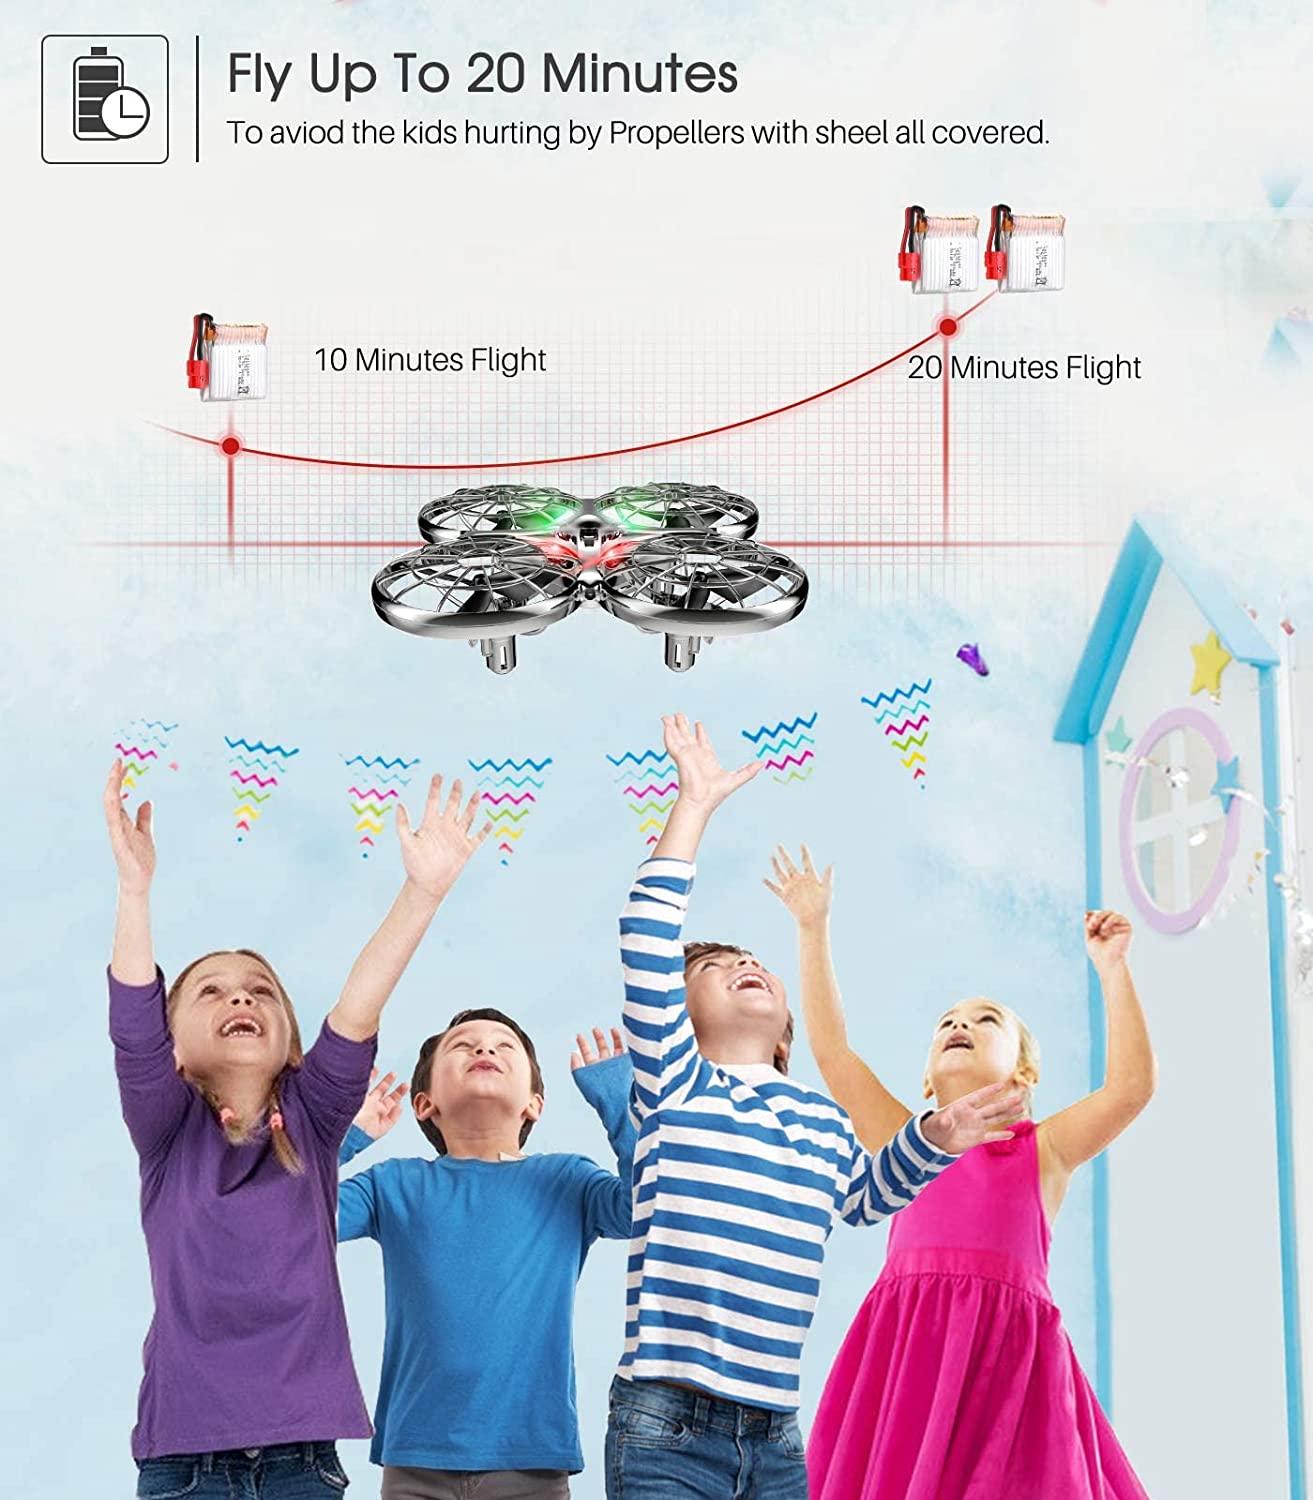 SYMA X100 Quadcopter with Auto-Avoid Obstacles, Safety Covered by Shell, 360°Flip, LED Light, 2 Speed for Kids, Boys and Girls Toys,Kids Hand Operated Drones - RCDrone